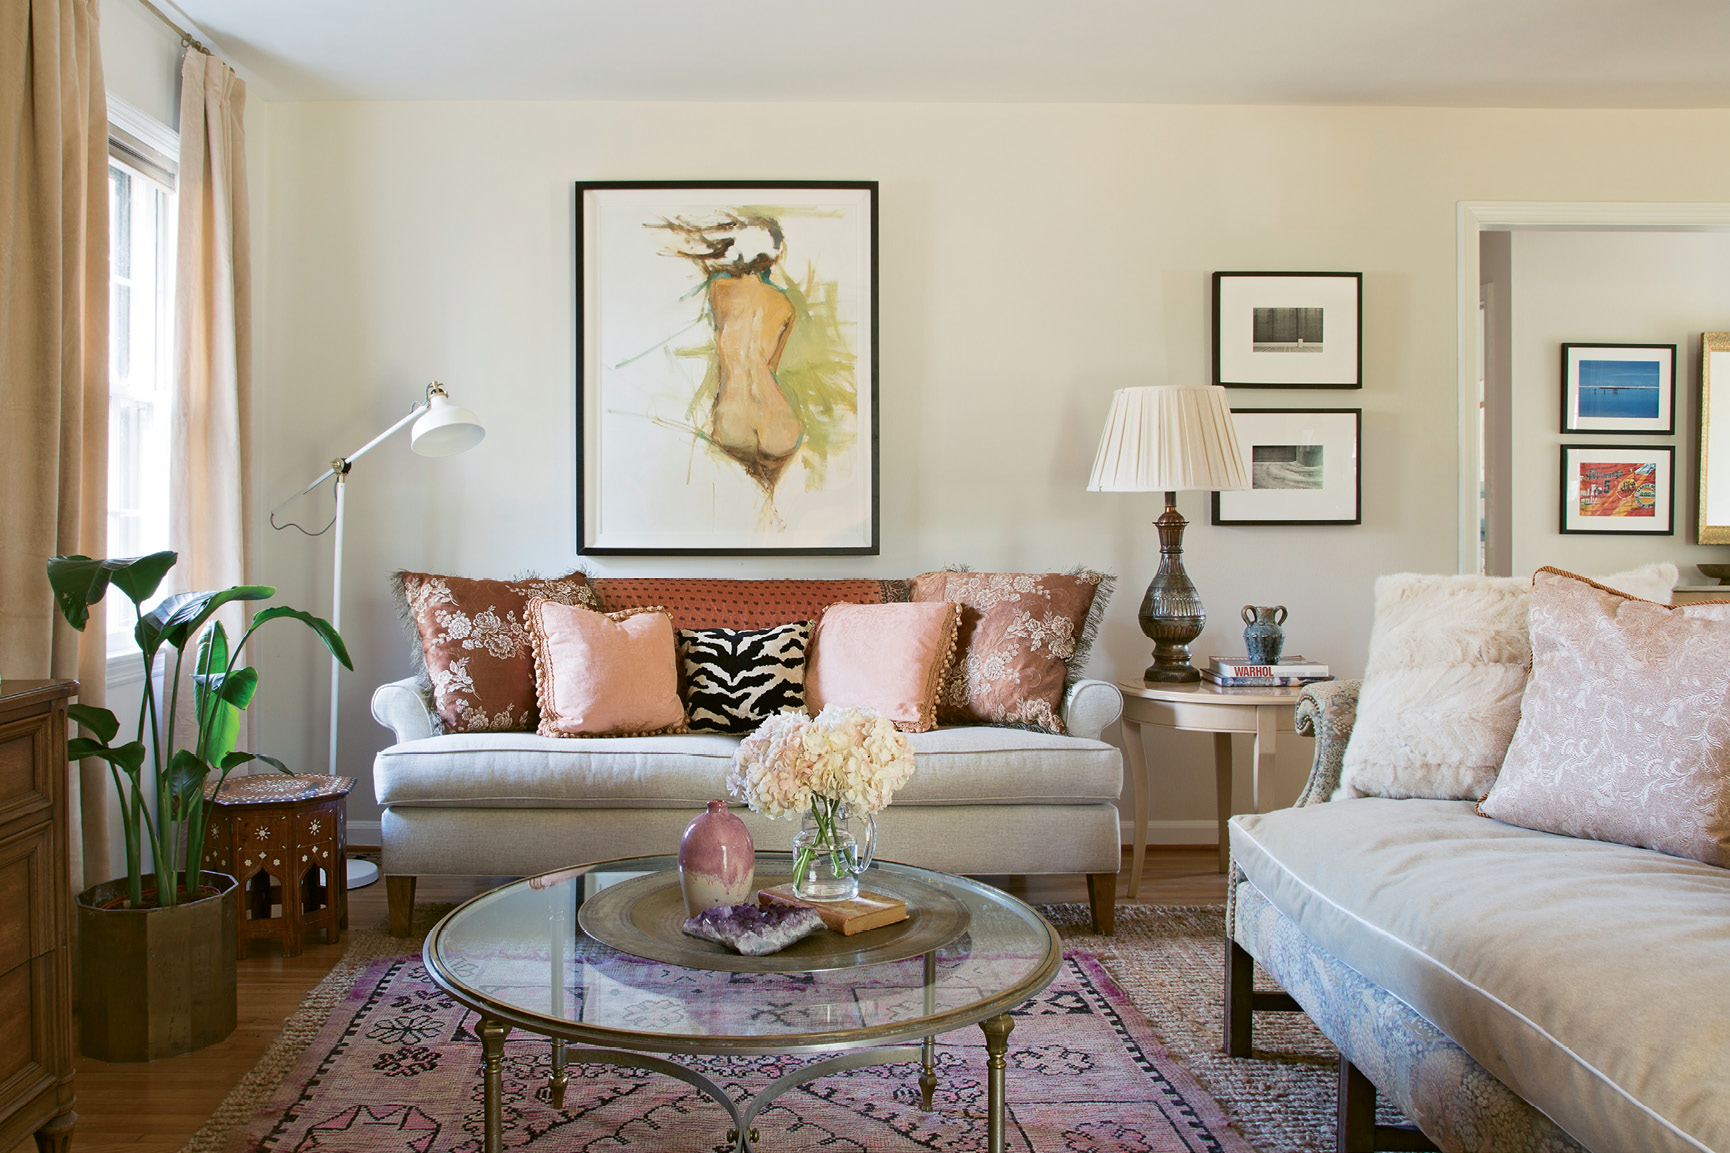 PERSONAL SPACE: When Charleston County Treasurer Mary Tinkler enlisted designer Erin Glennon to help overhaul her mid-century ranch, she wound up with a feminine retreat filled with meaningful pieces, including artwork collected over time and vintage furnishings that reflect her love of history.